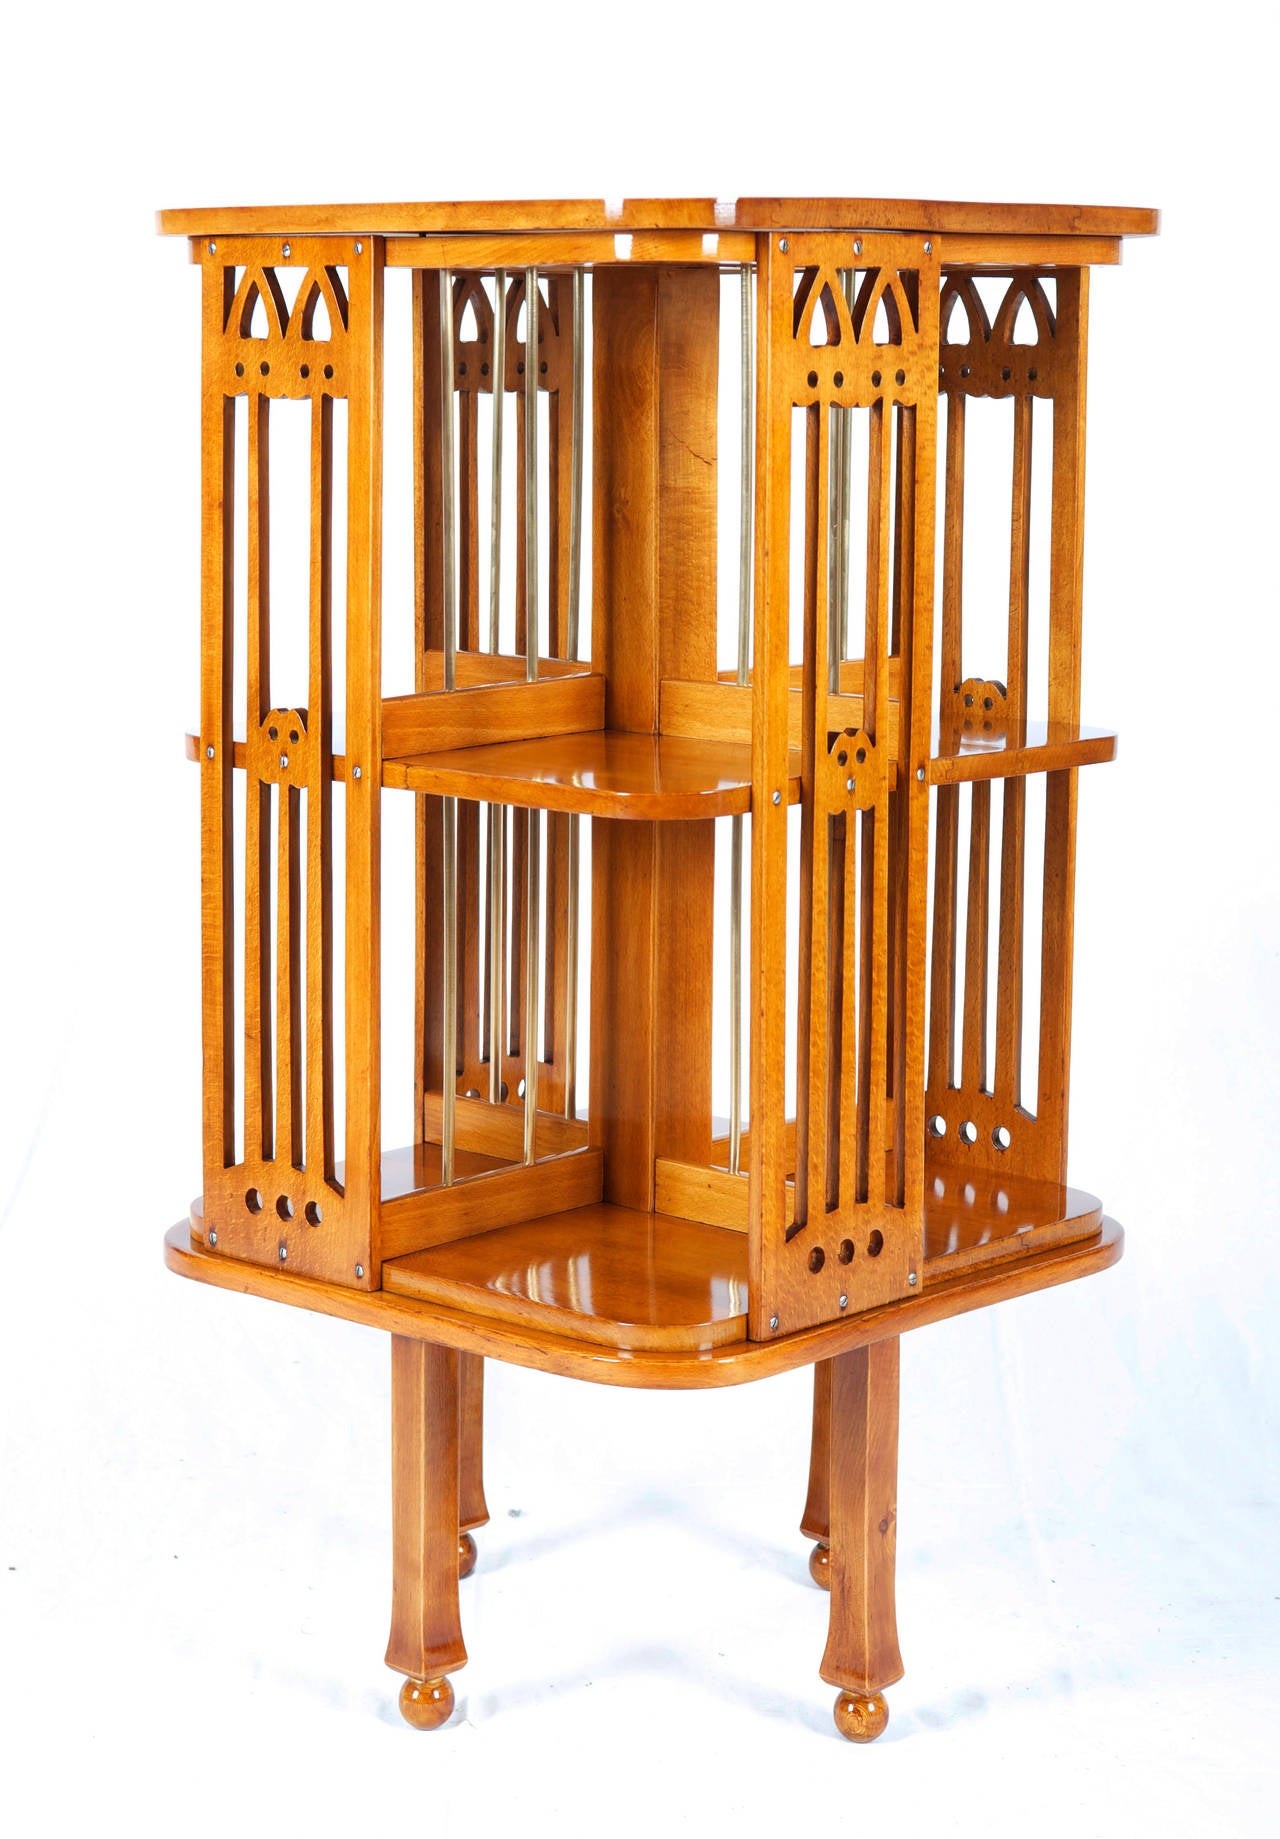 Rare  Thonet revolving bookcase with the catalogue number 3.
Restored with shellack finish.

See manufacturer catalog 